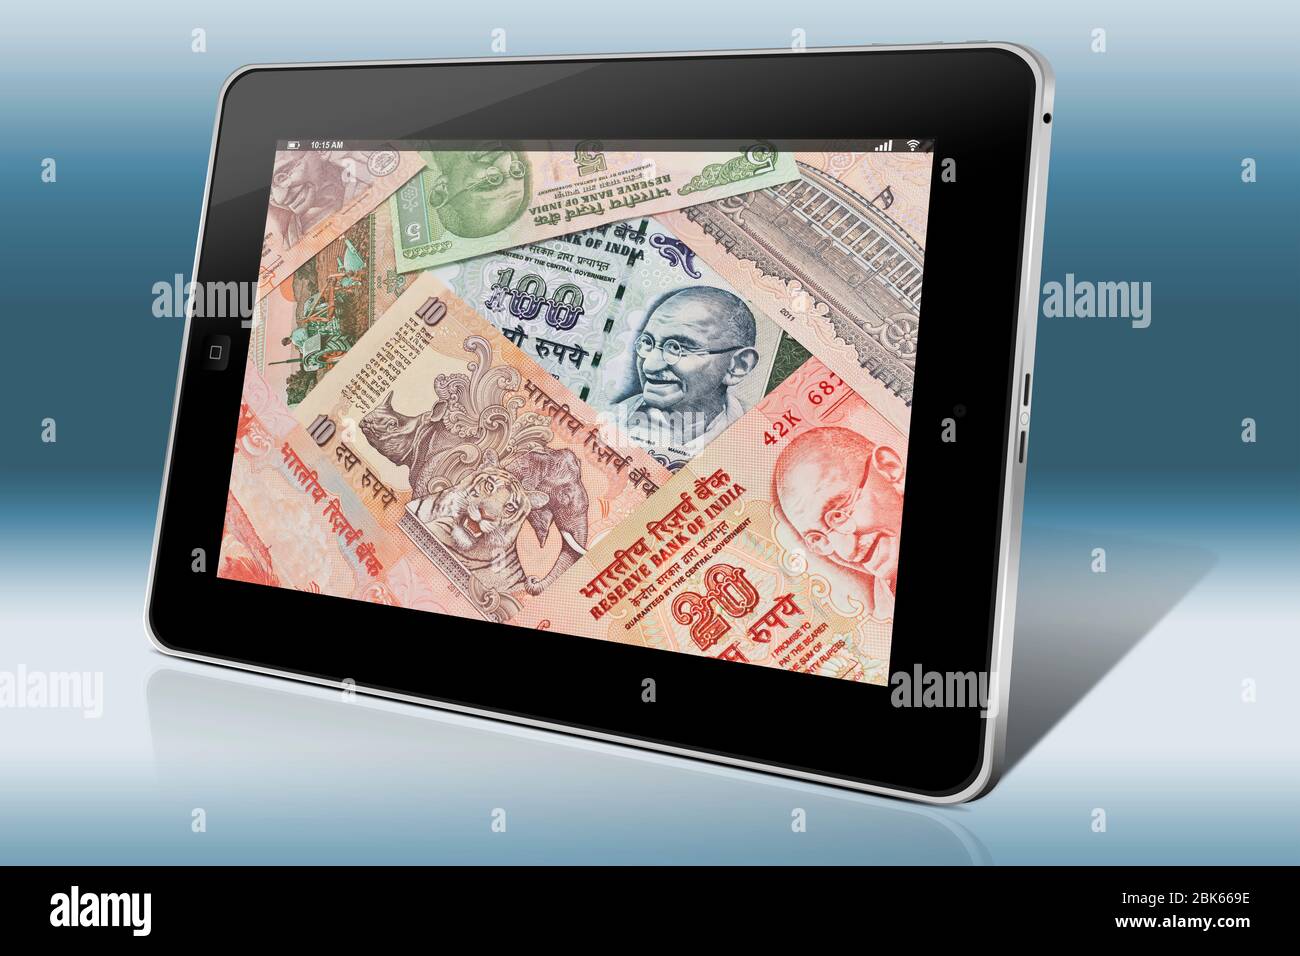 Many Indian rupees bills with the portrait of Mahatma Gandhi lying side by side, India, Asia Stock Photo